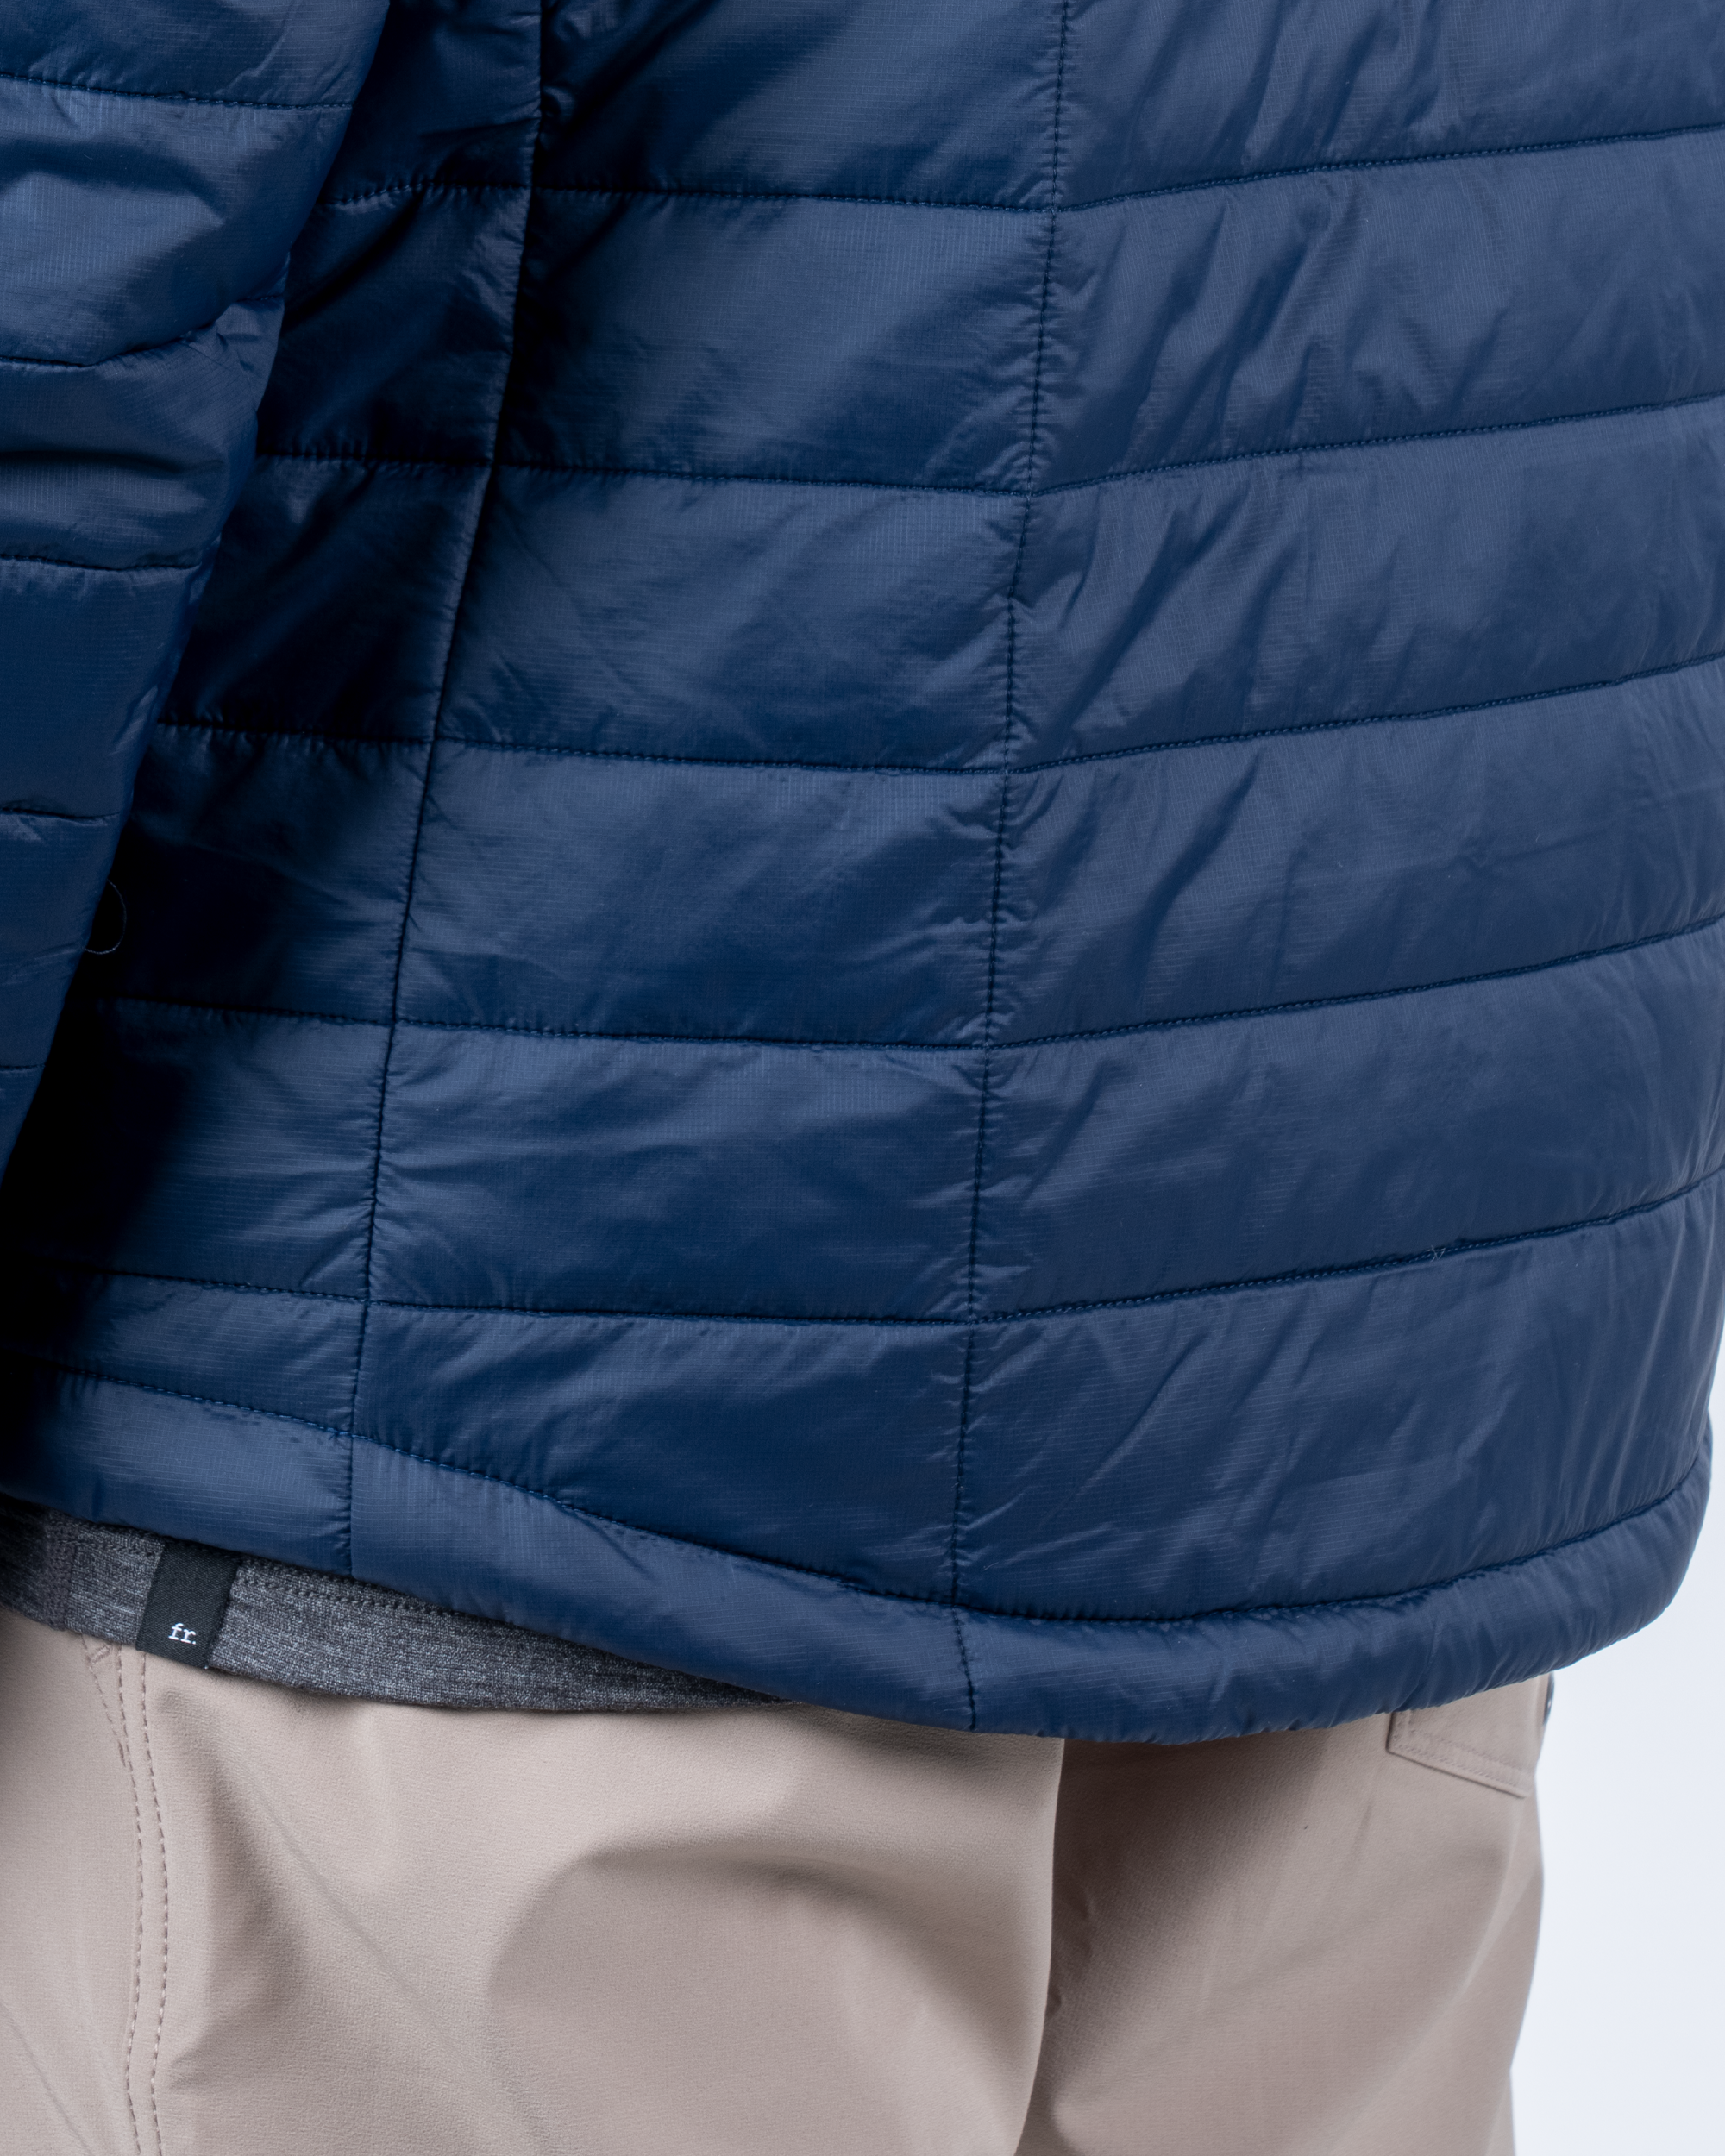 Foreign Rider Co Recycled Primaloft Gold Insulated Eco Navy Jacket Bottom Back Scoop Detail